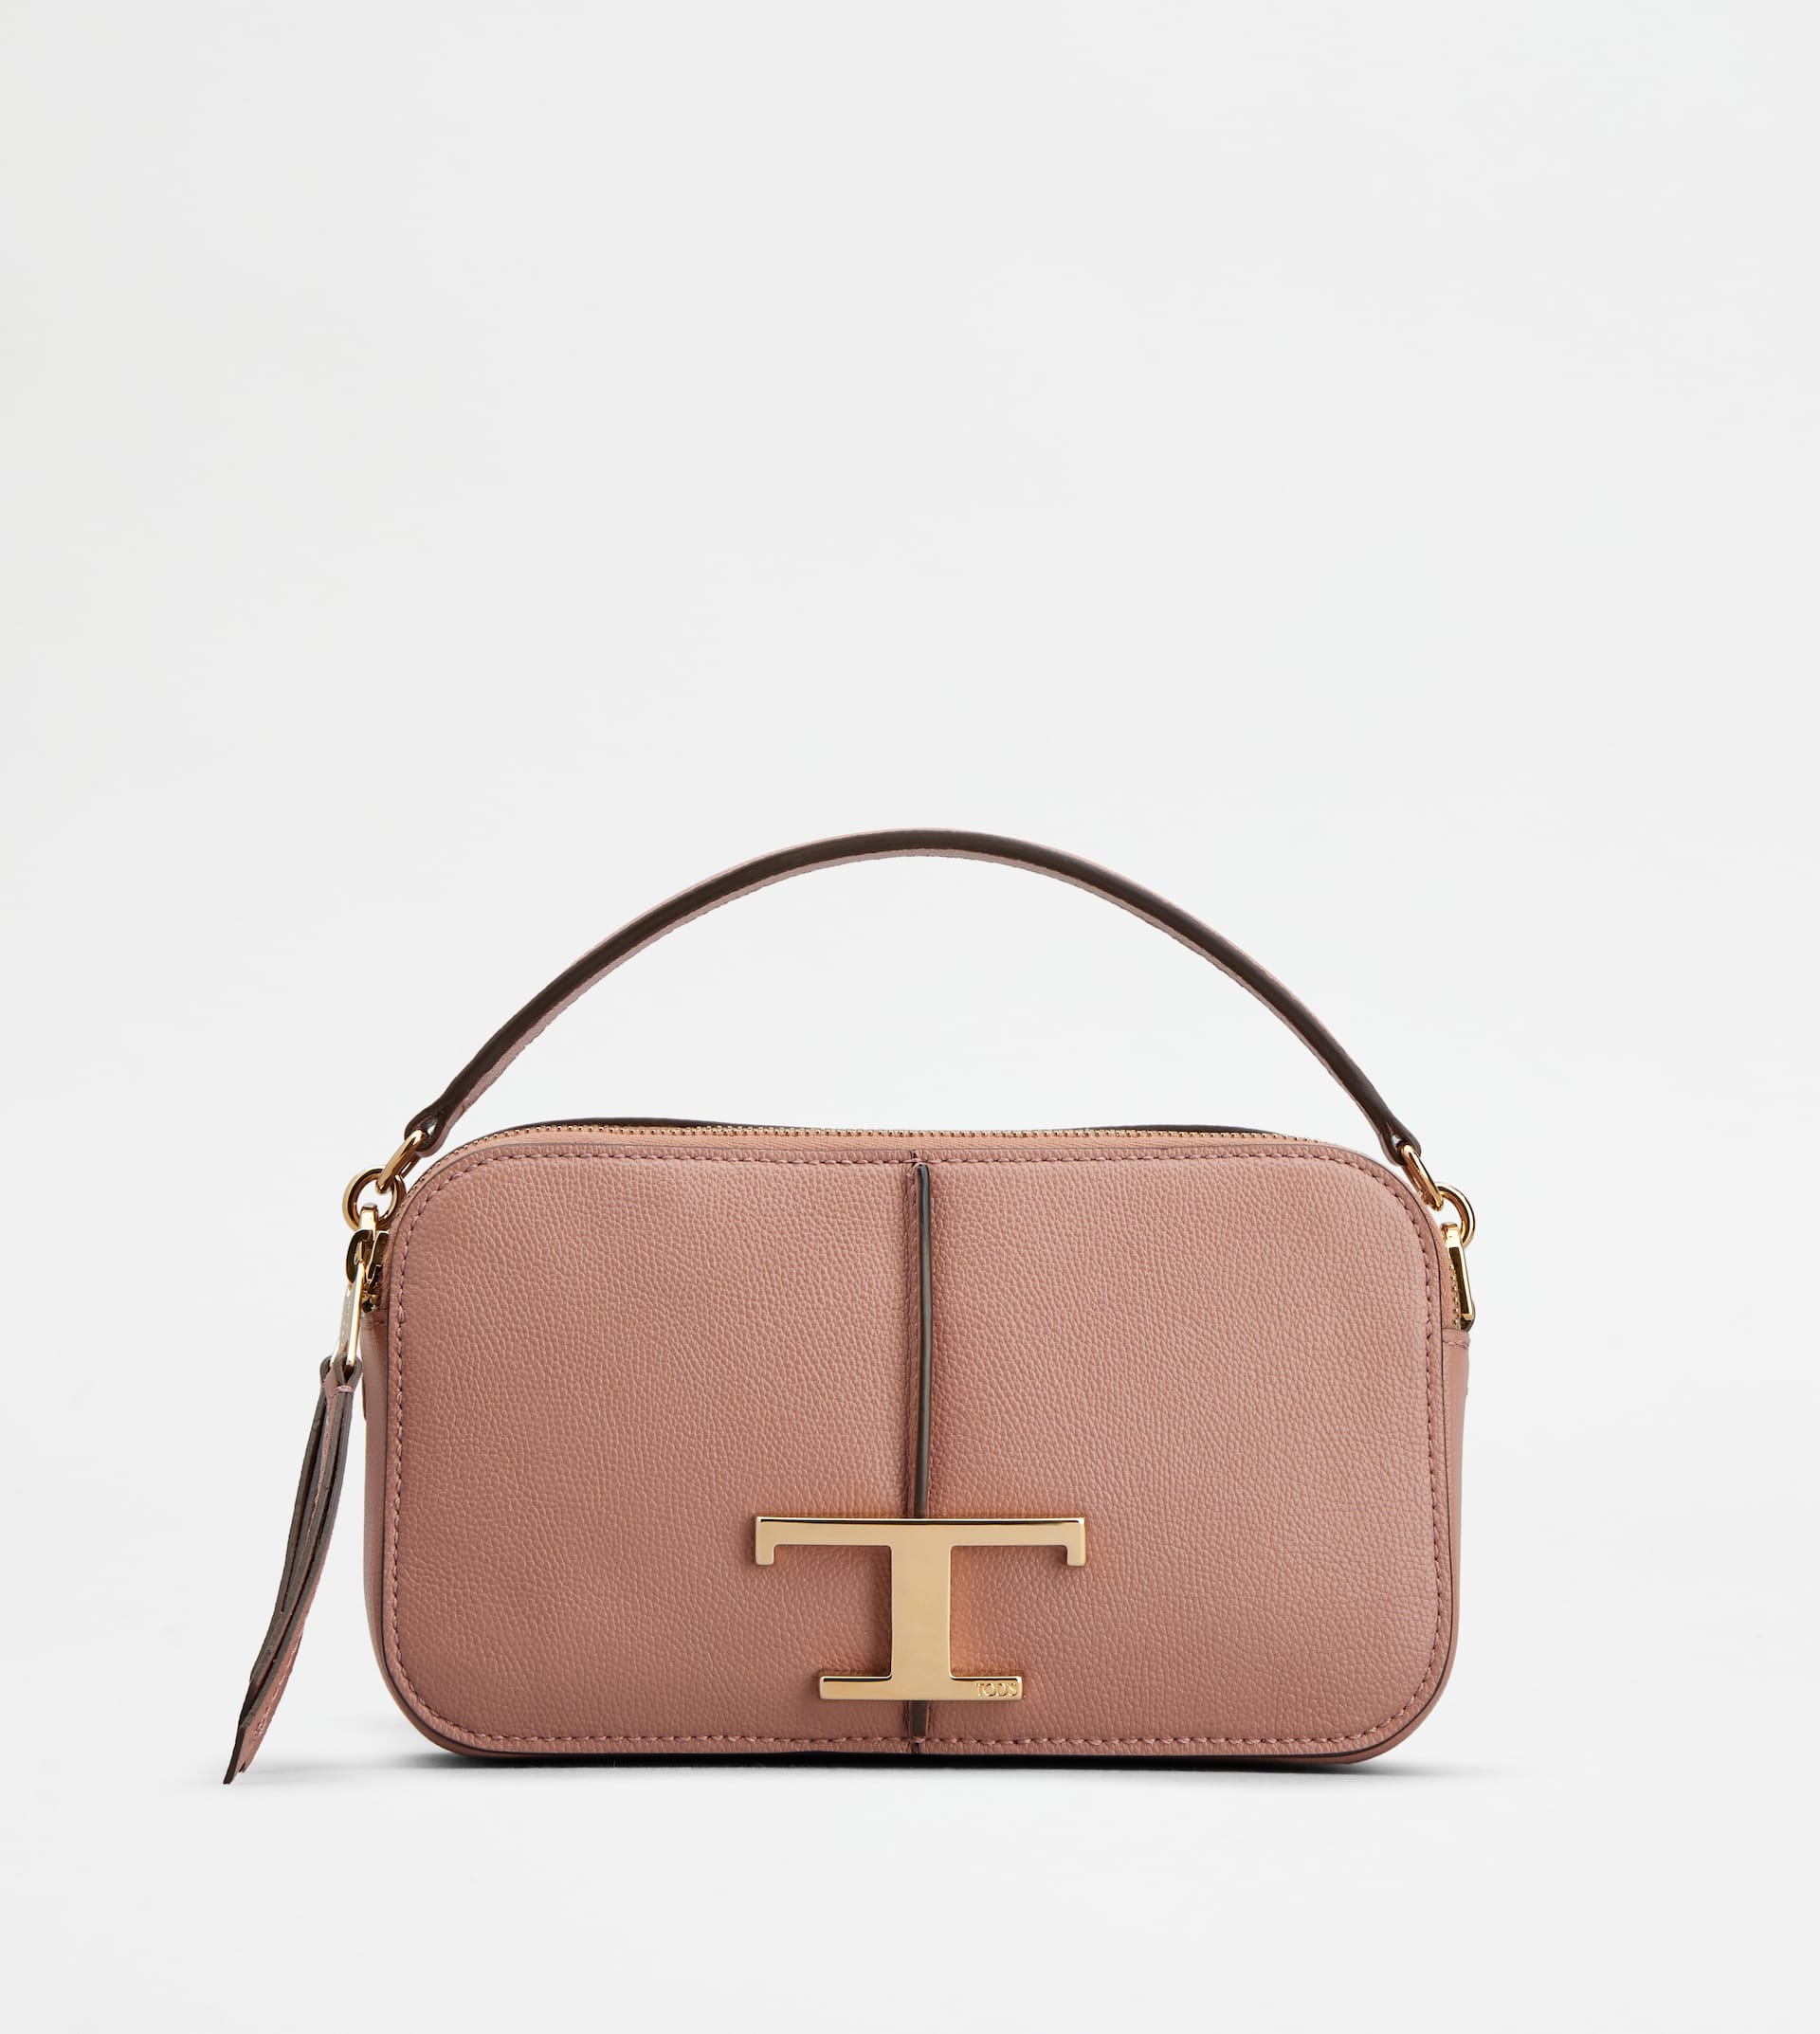 T TIMELESS CAMERA BAG IN LEATHER MINI - PINK - 1